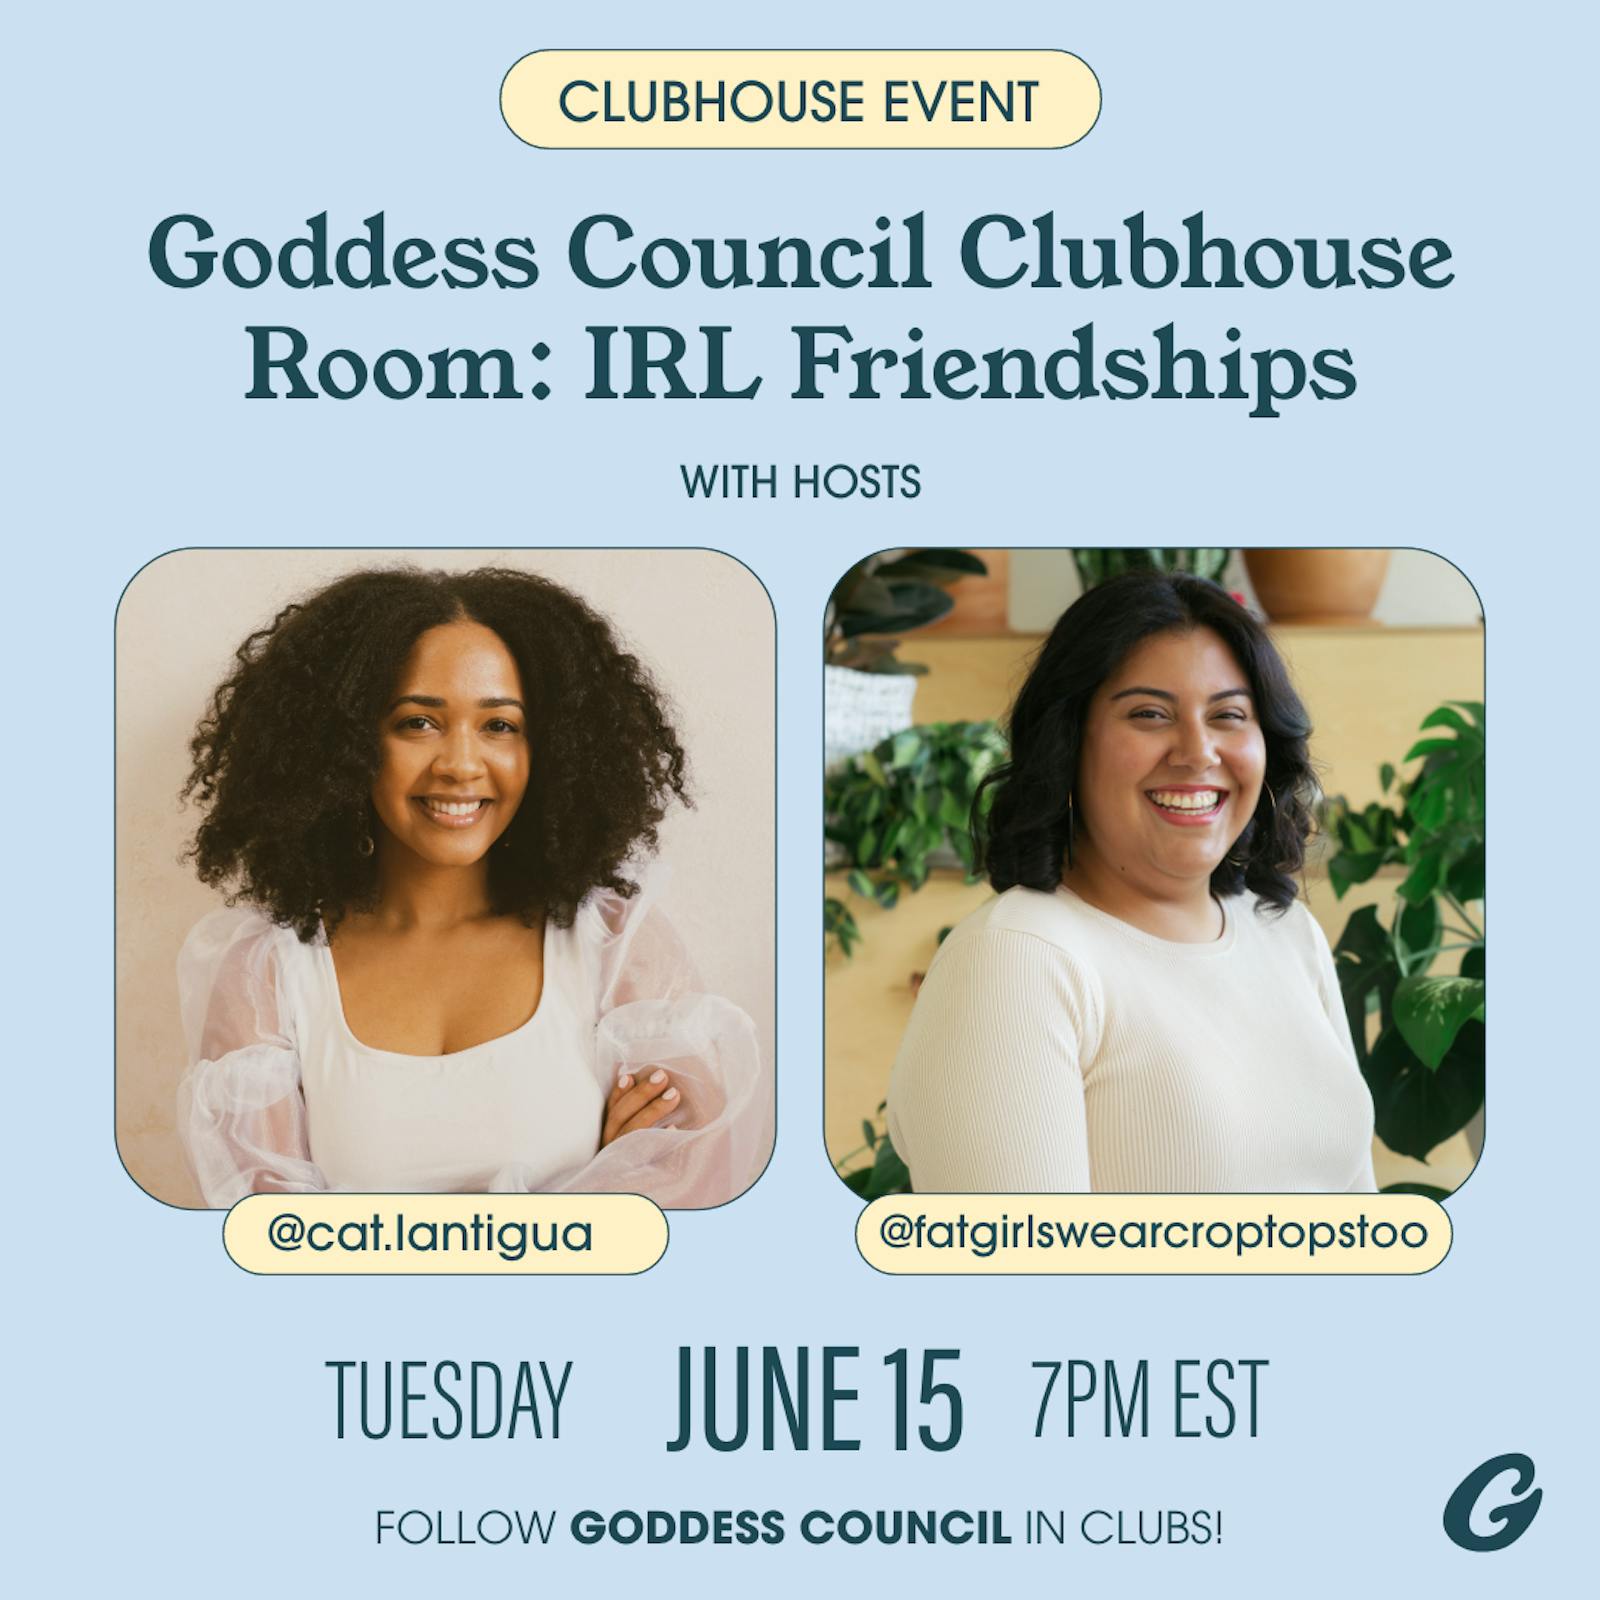 Goddess Council Clubhouse Room: IRL Friendships